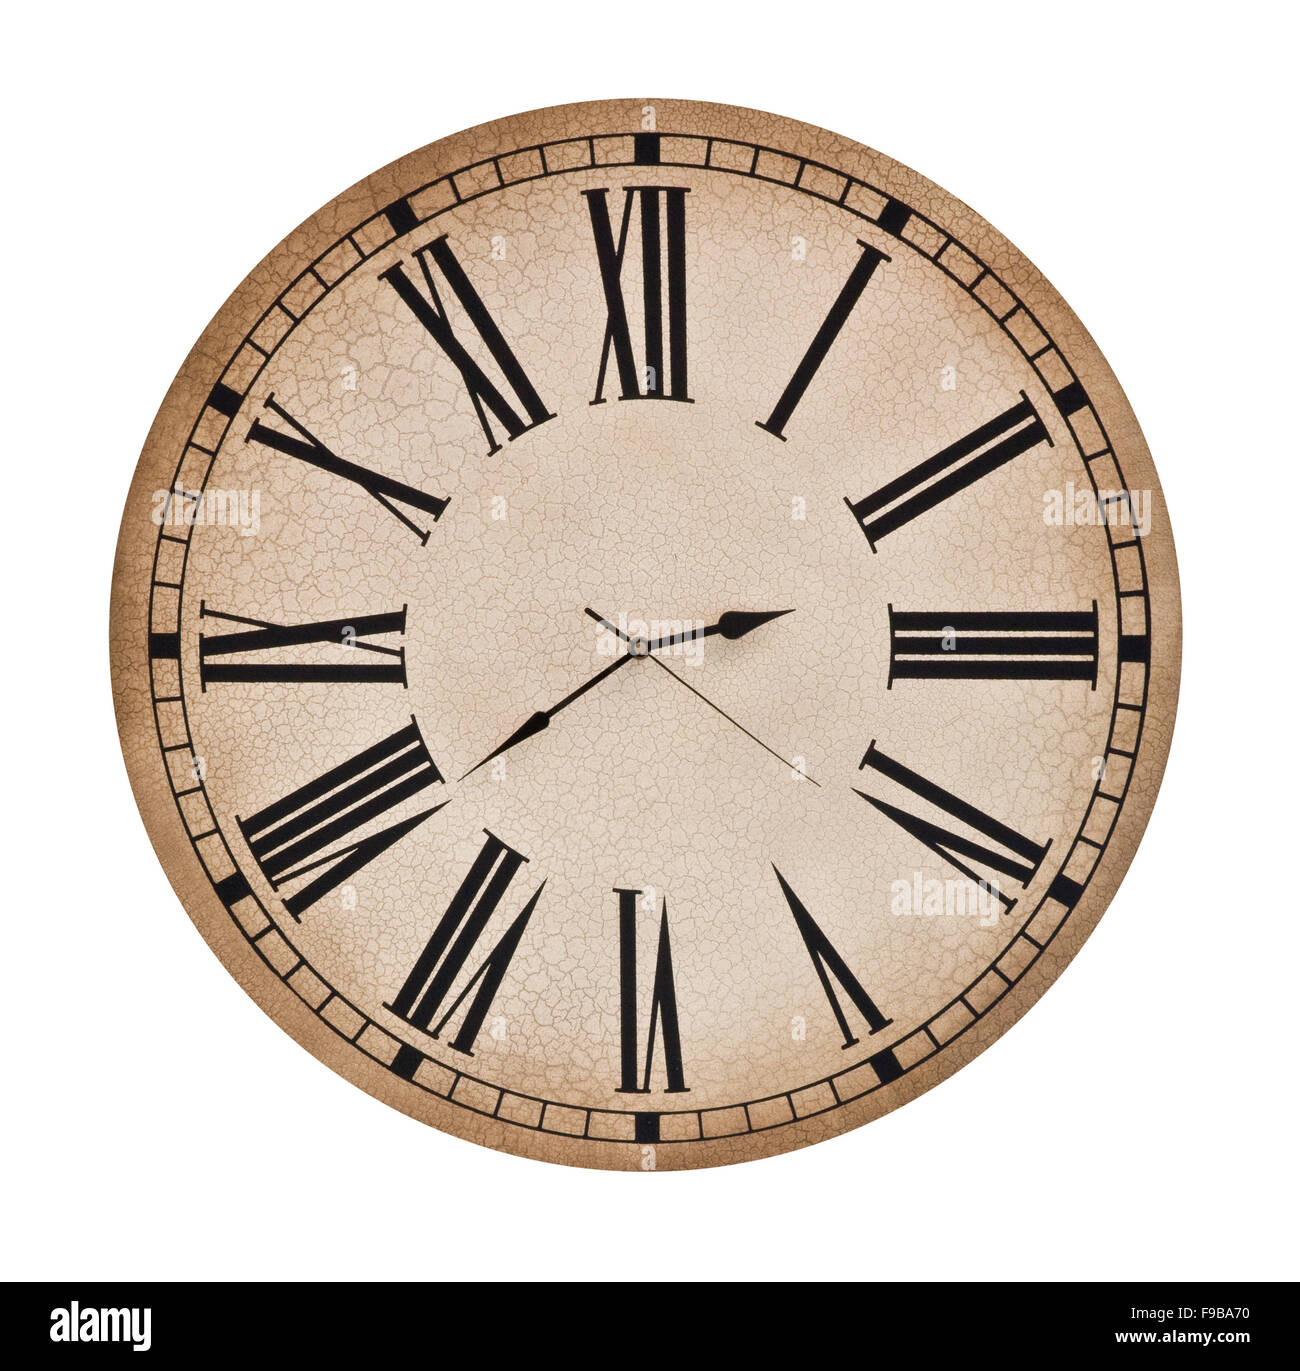 Antique looking clock face on a White Background Stock Photo